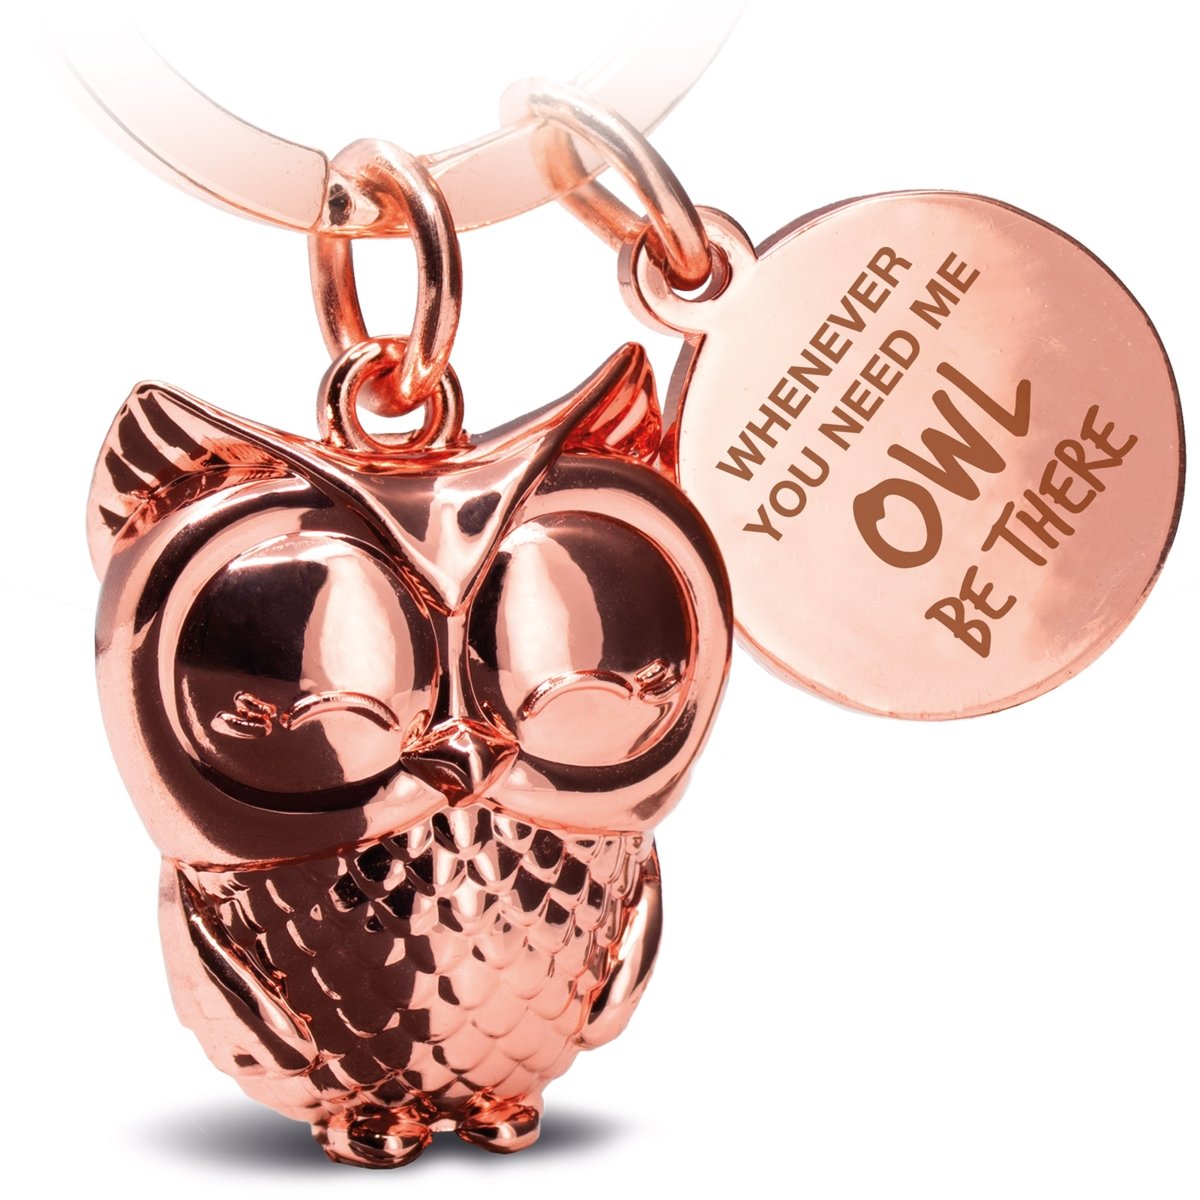 "Whenever you need me, OWL be there" Eule Schlüsselanhänger "Owly" mit Gravur - Süße Eule Glücksbringer - FABACH#farbe_roségold